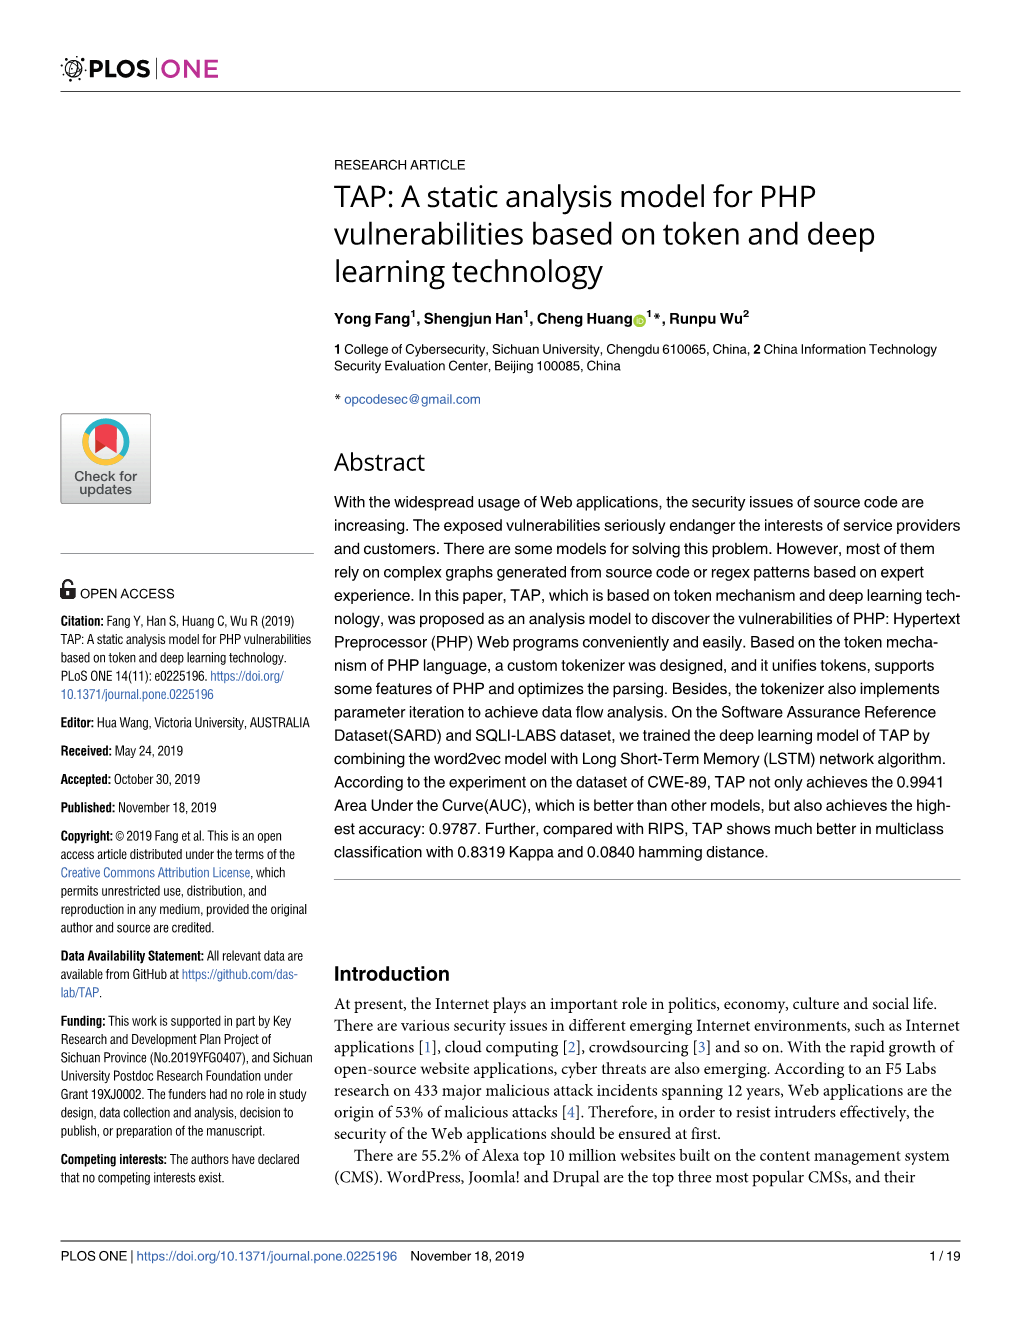 TAP: a Static Analysis Model for PHP Vulnerabilities Based on Token and Deep Learning Technology